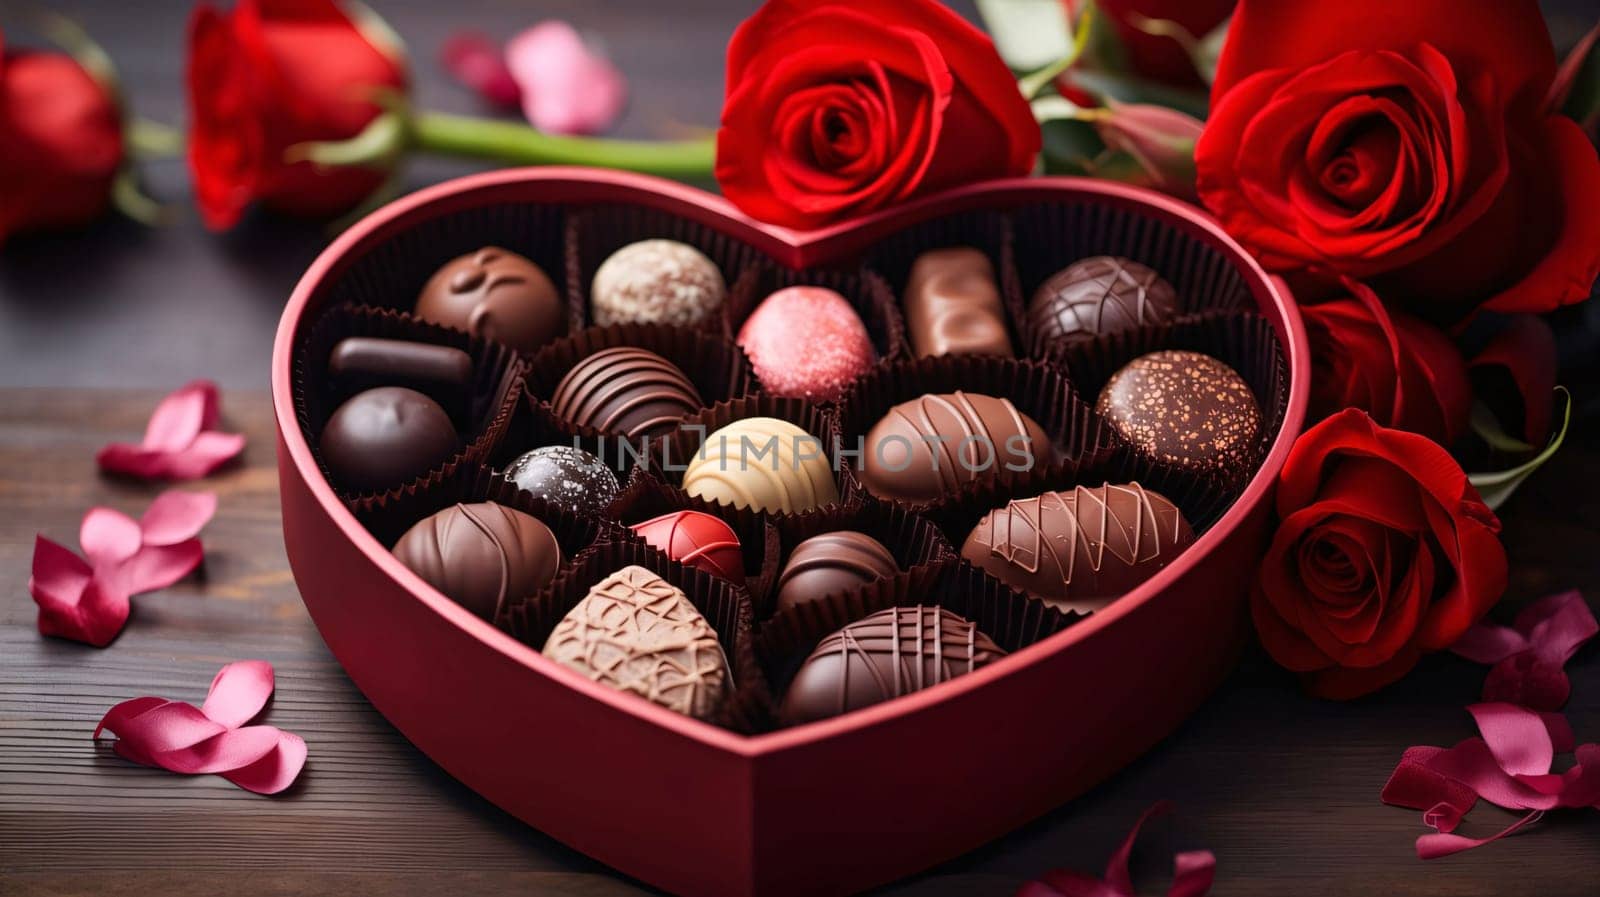 Heart with chocolates, red roses all around. Gifts as a day symbol of present and love. A time of falling in love and love.